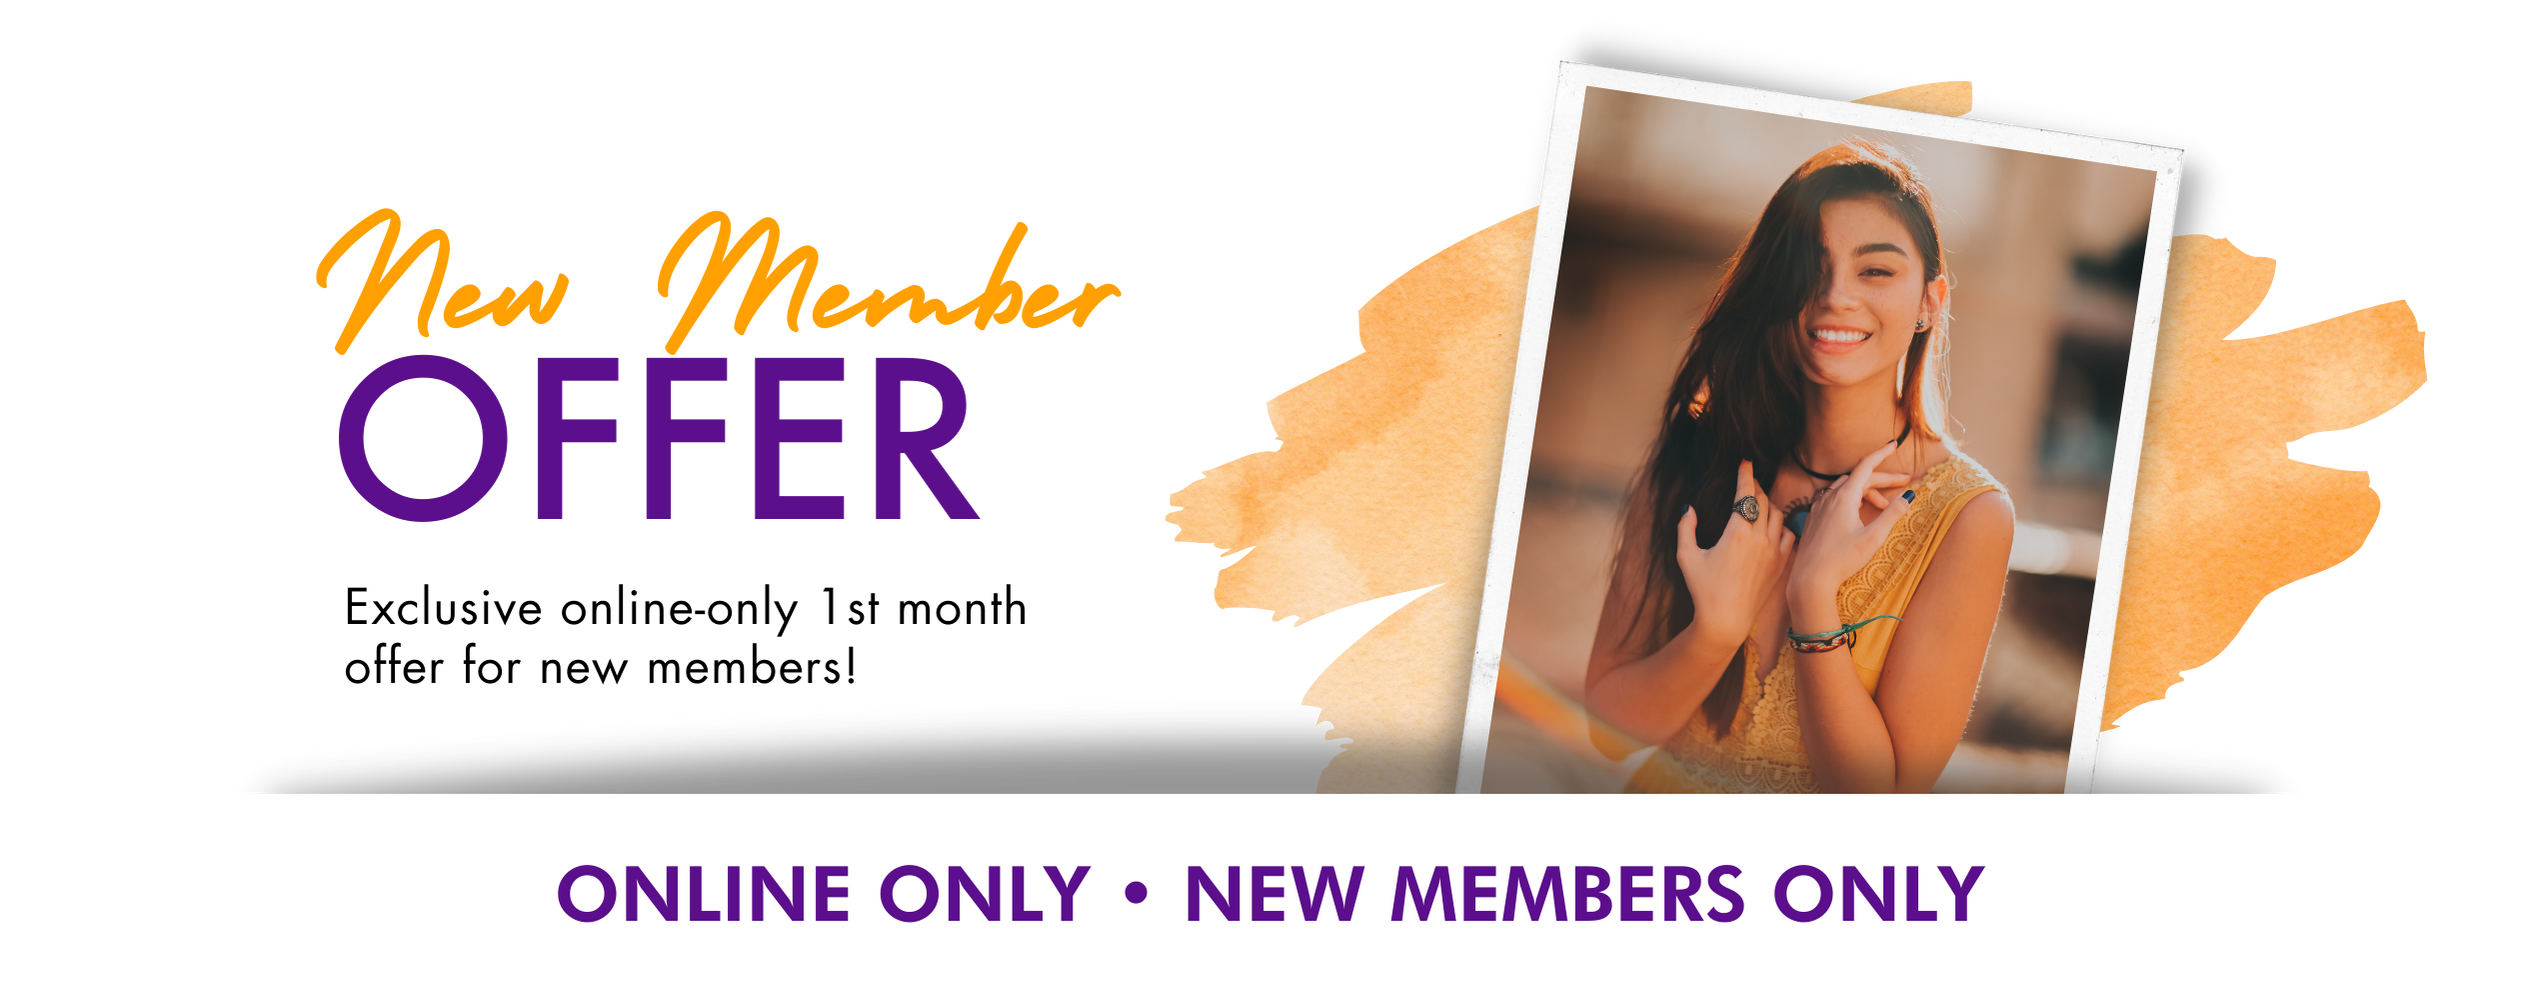 New Member Offer: Exclusive online-only 1st month offer for new members! Online Only. New Members Only.